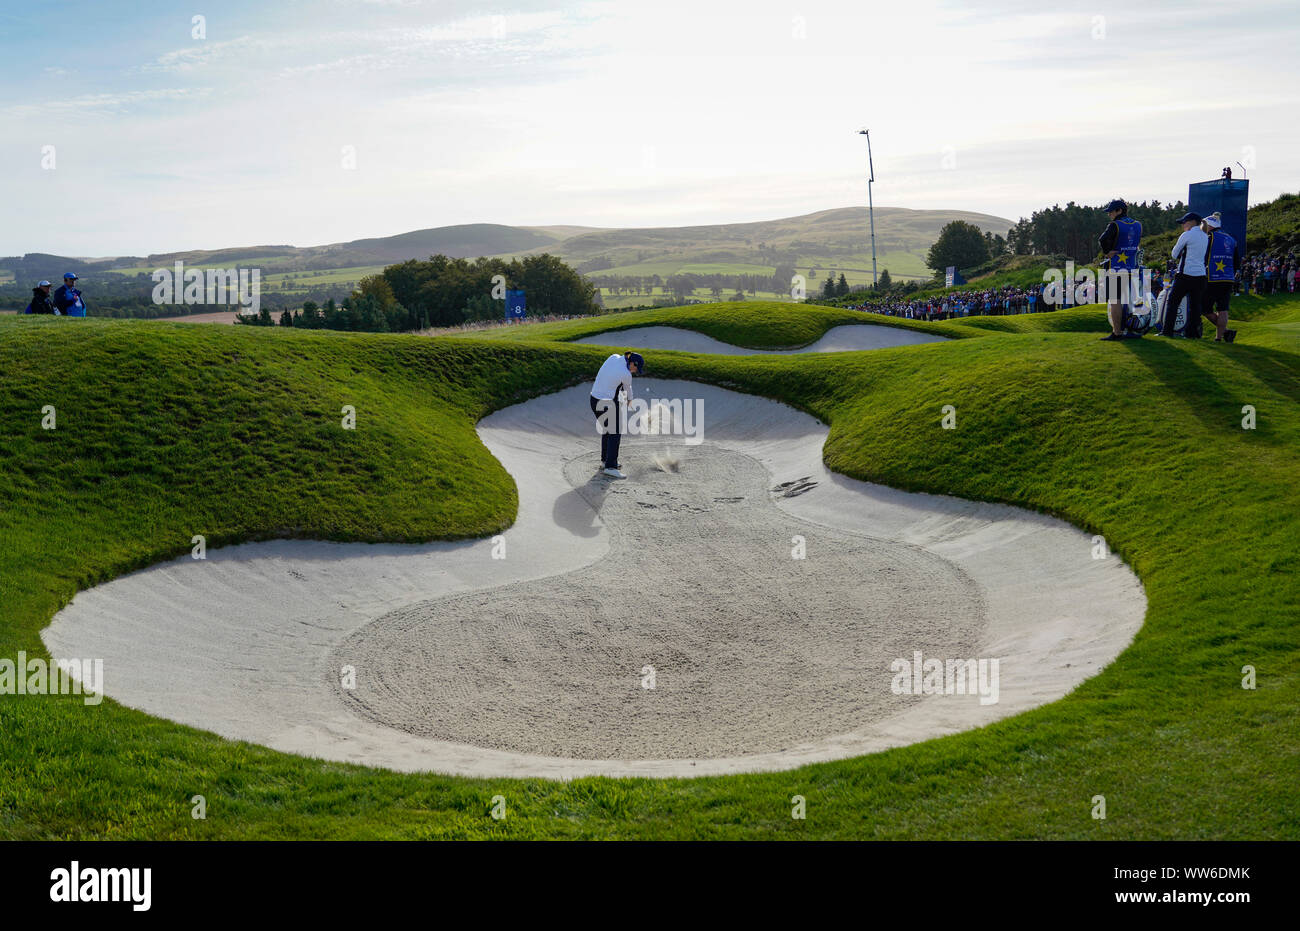 Auchterarder, Scotland, UK. 13 September 2019. Friday Foresomes matches on Friday Morning at 2019 Solheim Cup on Centenary Course at Gleneagles. Pictured; Caroline Masson of Europe plays bunker shot on 8th hole. Iain Masterton/Alamy Live News Stock Photo